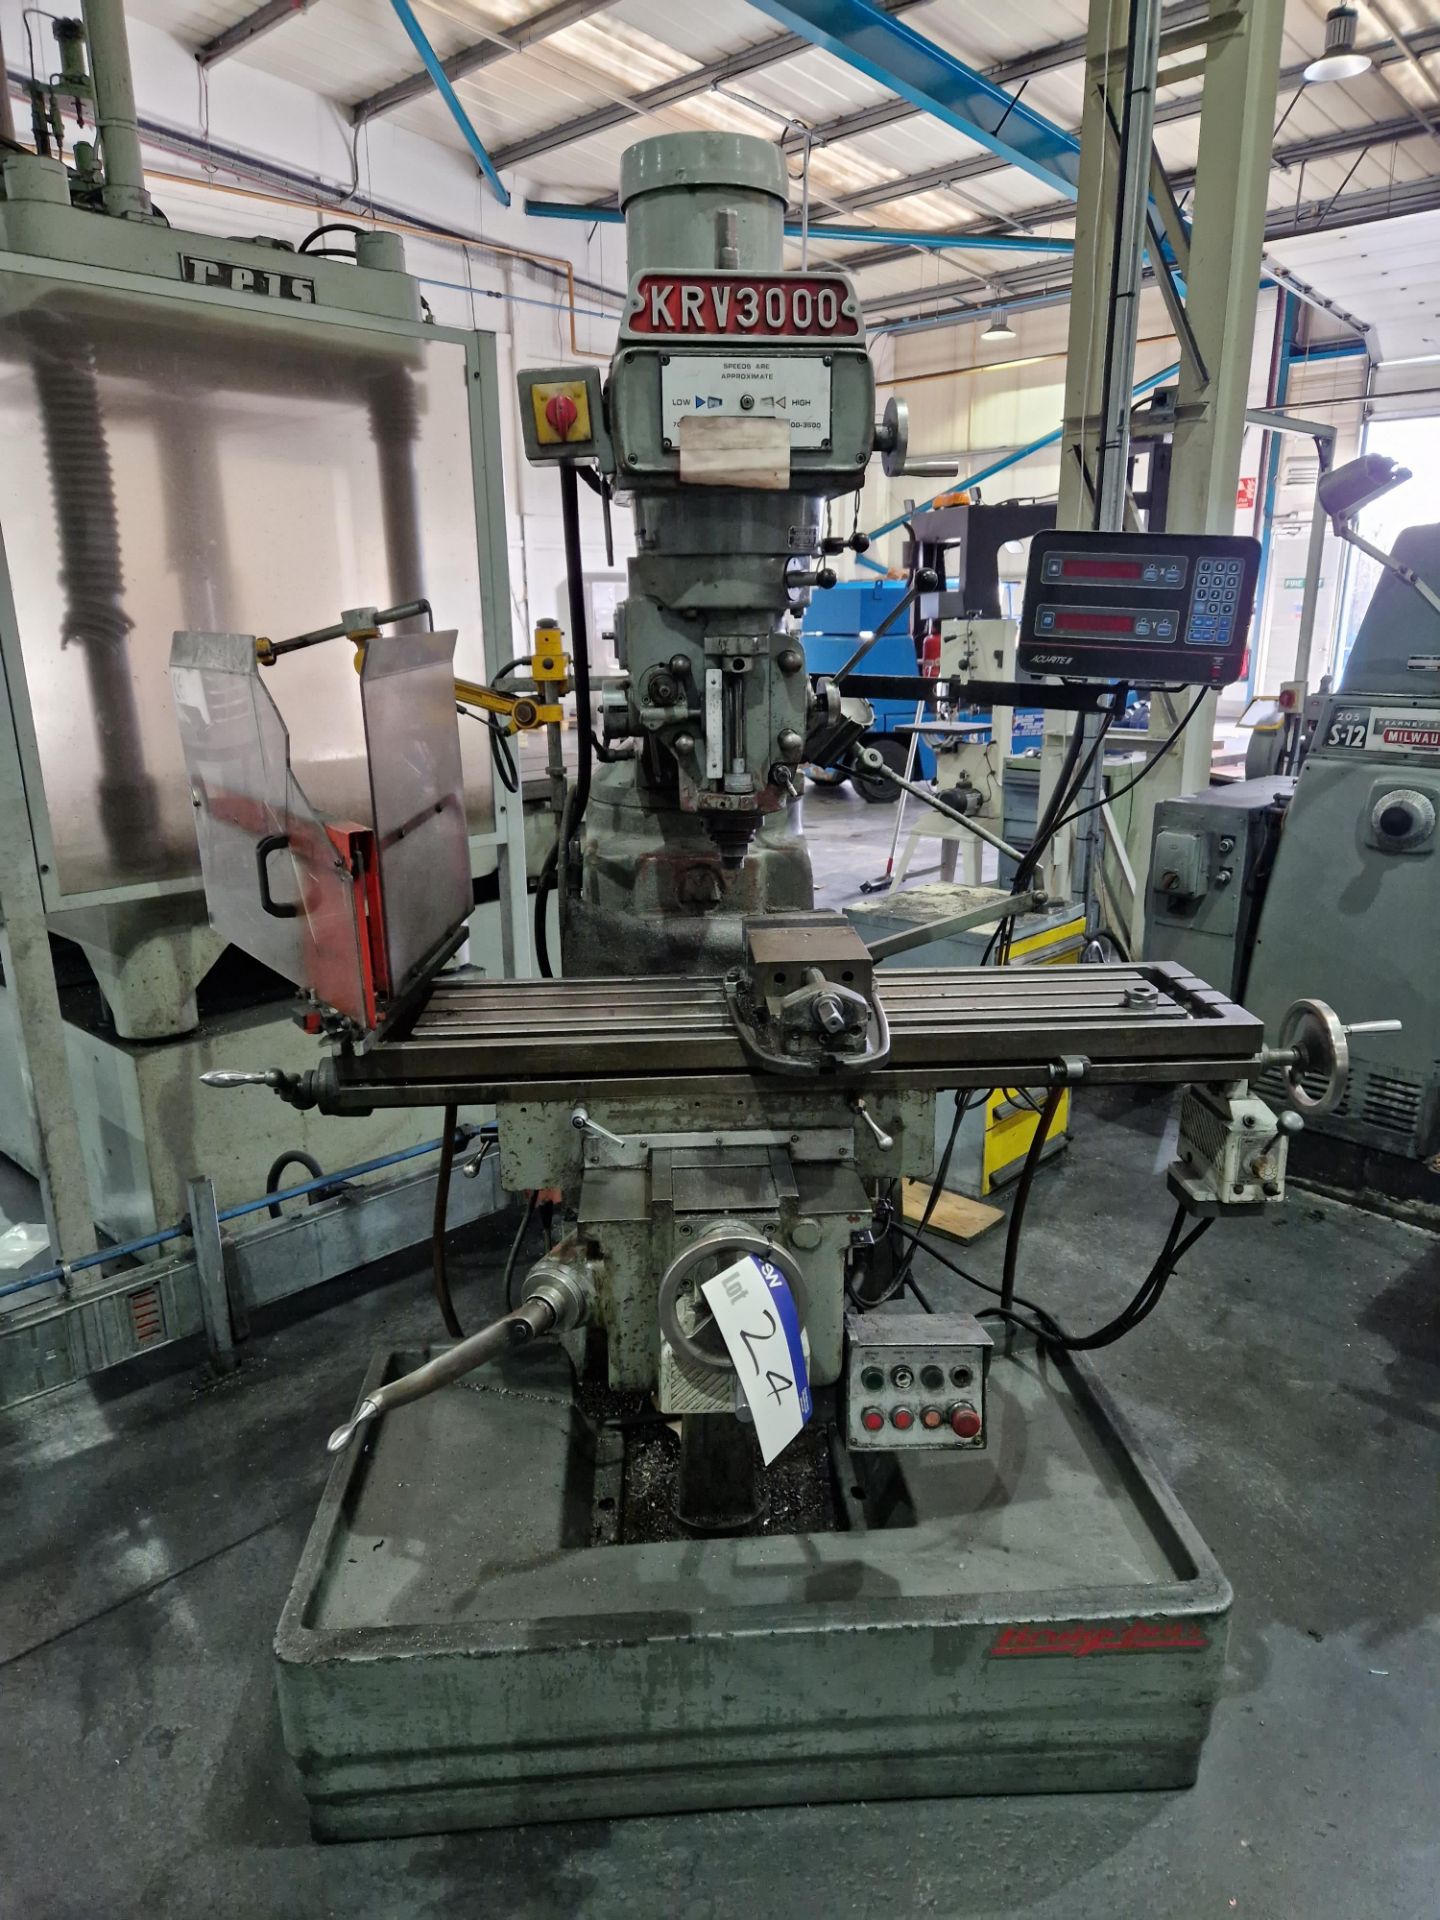 KING RICH Industries KR-V3000 Univeral Head Milling Machine, Serial No. 2836 with ARH-RITE III X-Y - Image 2 of 7